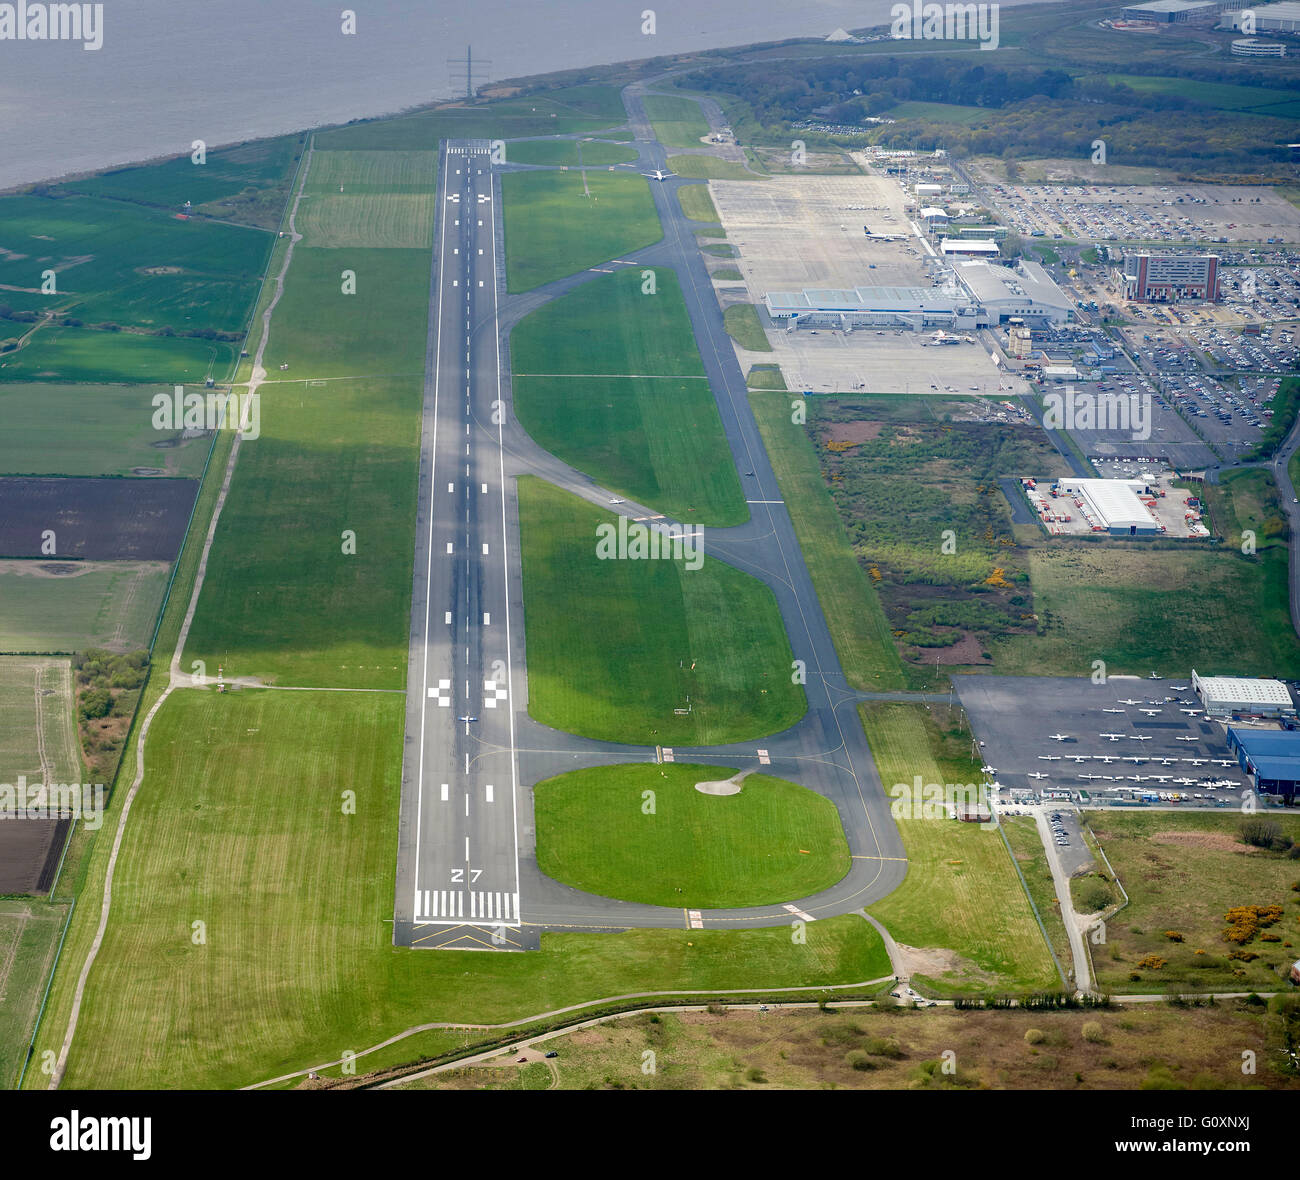 A Pilots view of Liverpool John Lennon Airport runway, Liverpool, Merseyside, NW England, UK Stock Photo